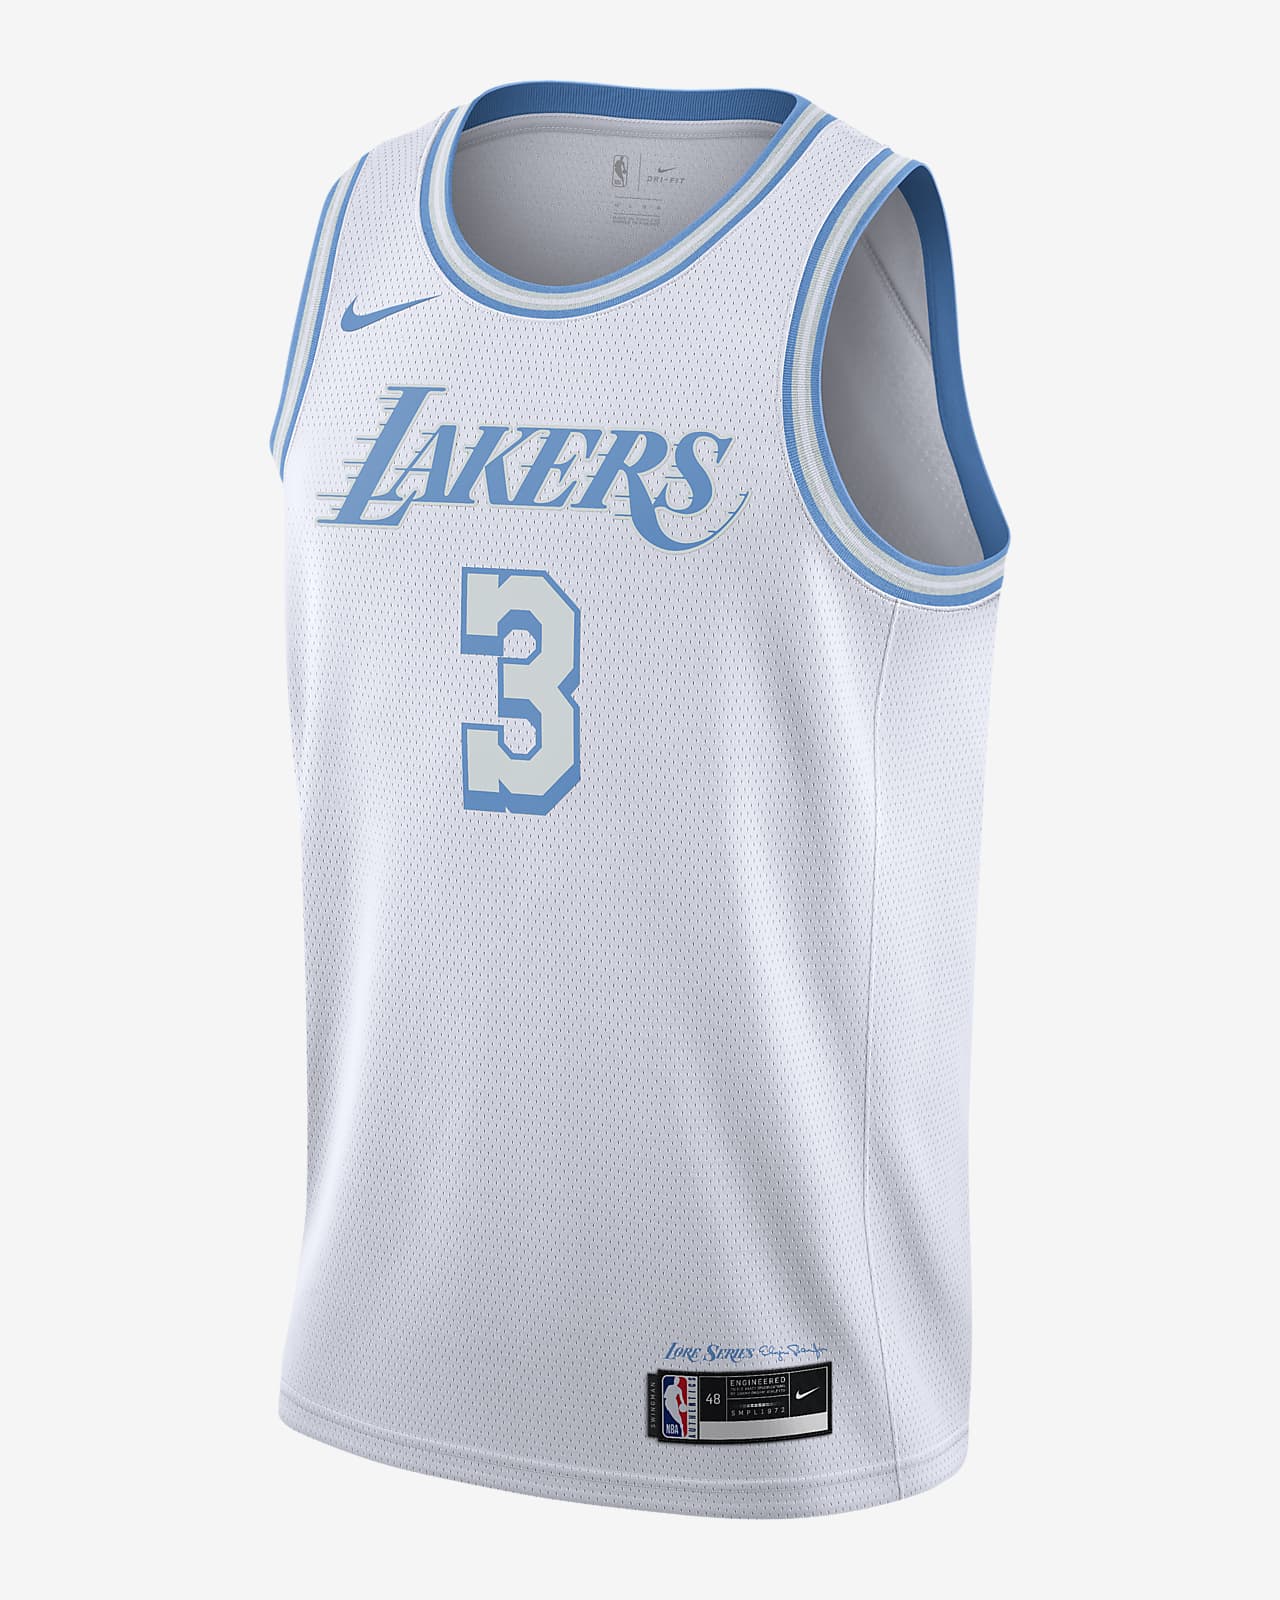 los angeles lakers jersey dress